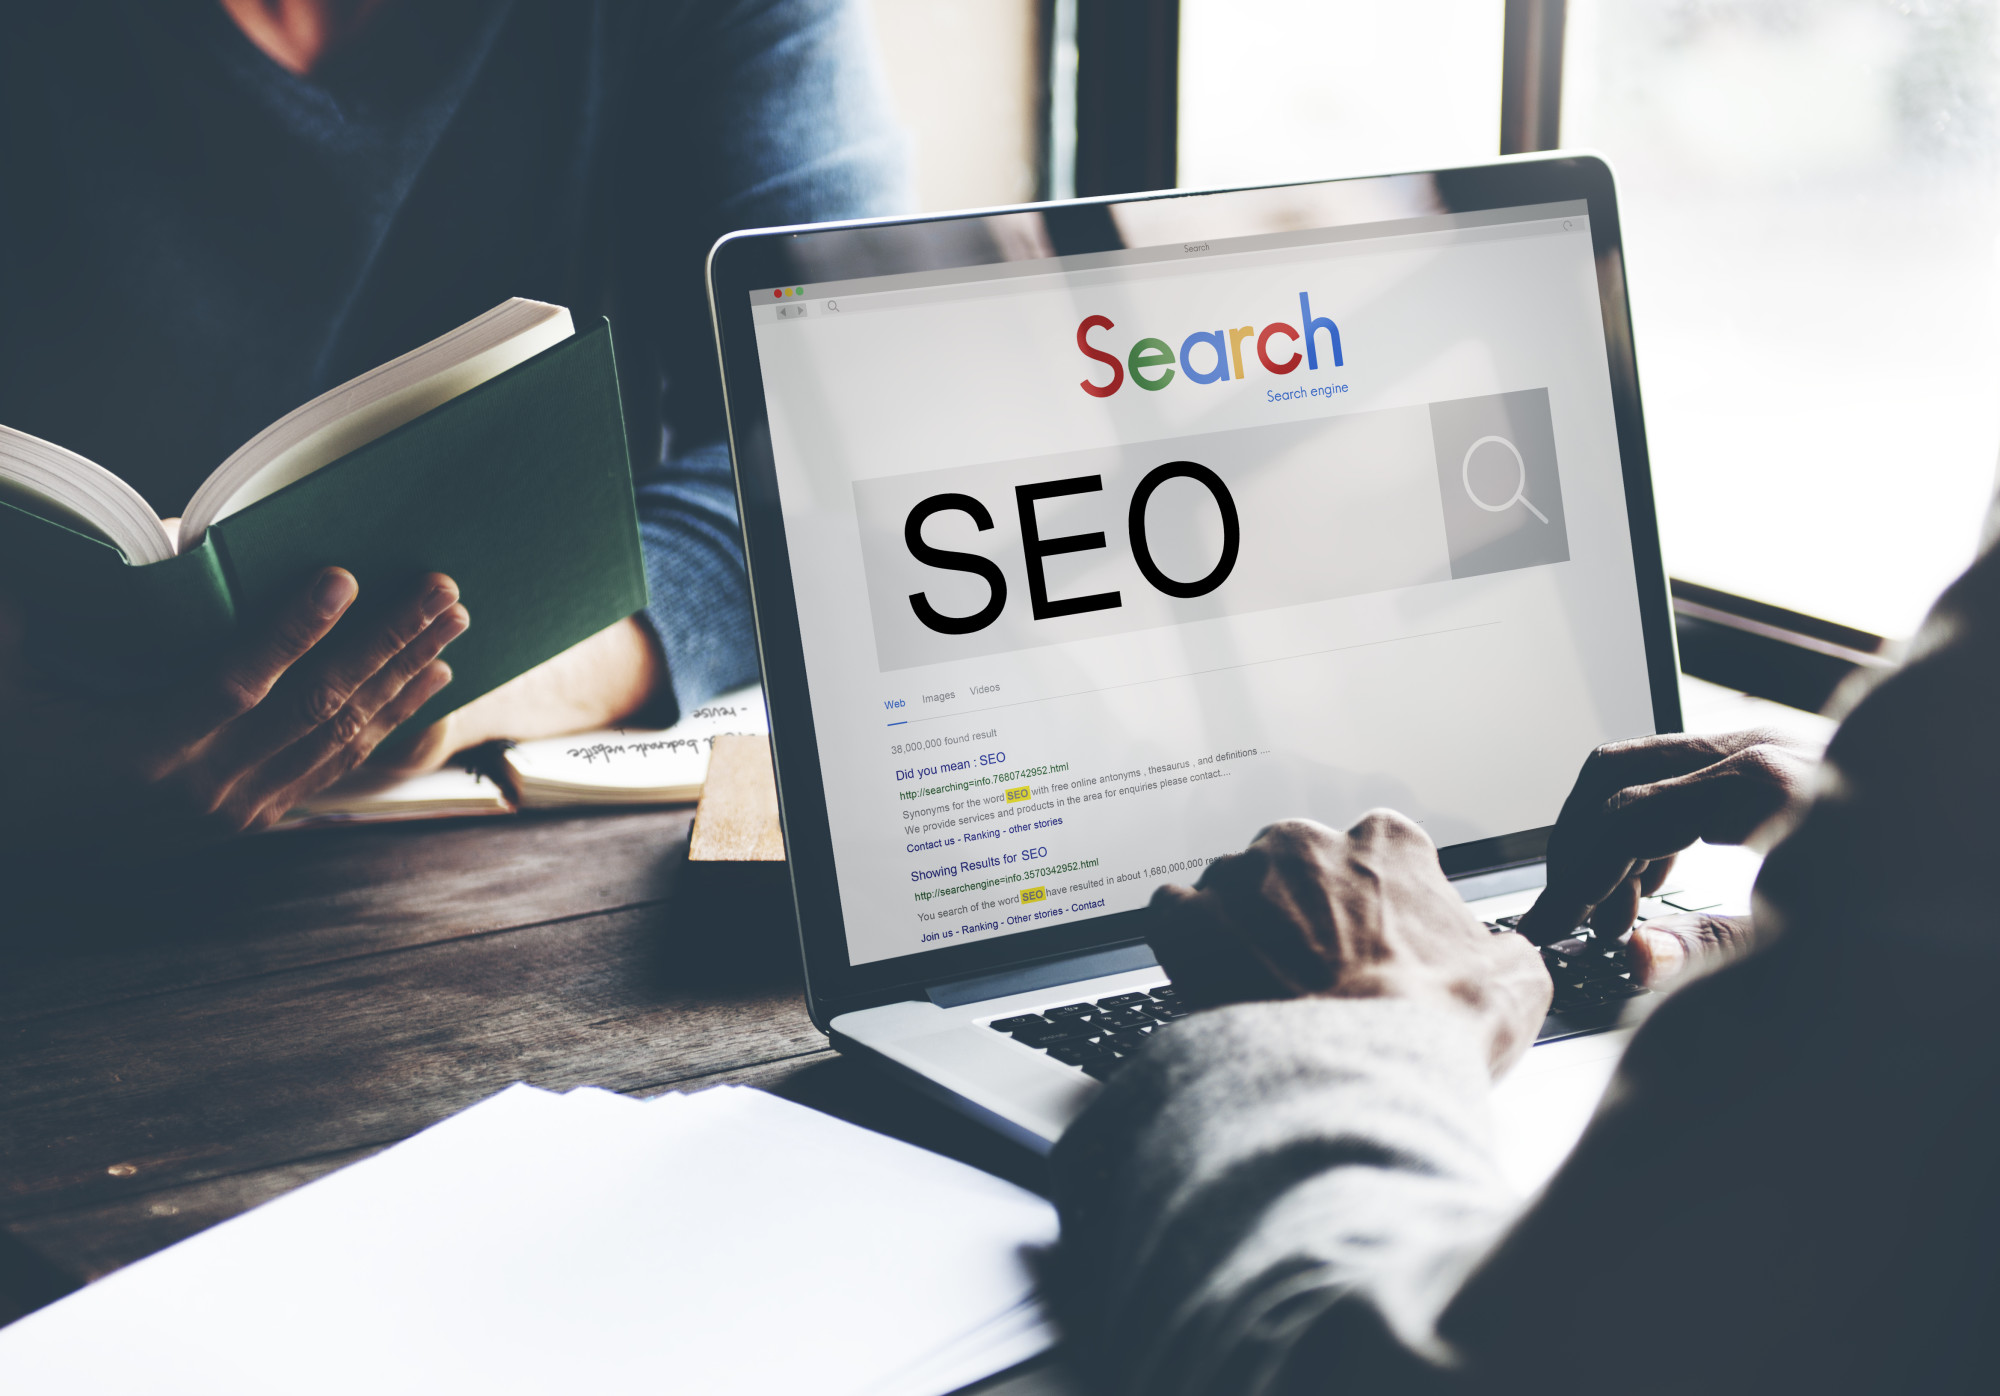 9 SEO Tips for 2022